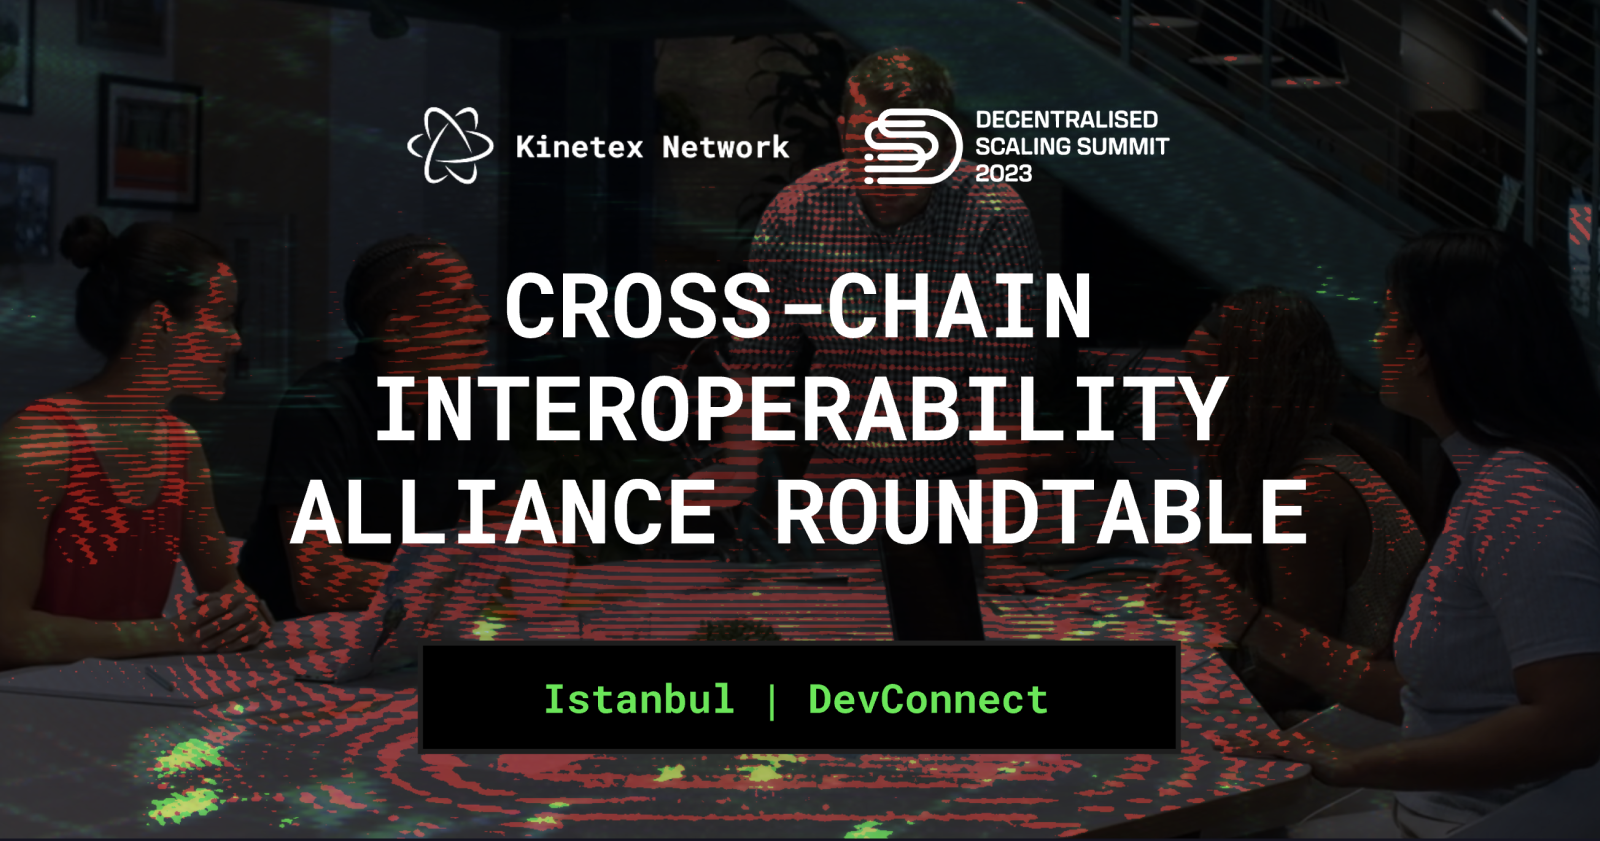 Cross-chain Interoperability Alliance Roundtable: Discussing a New Cross-chain Approach